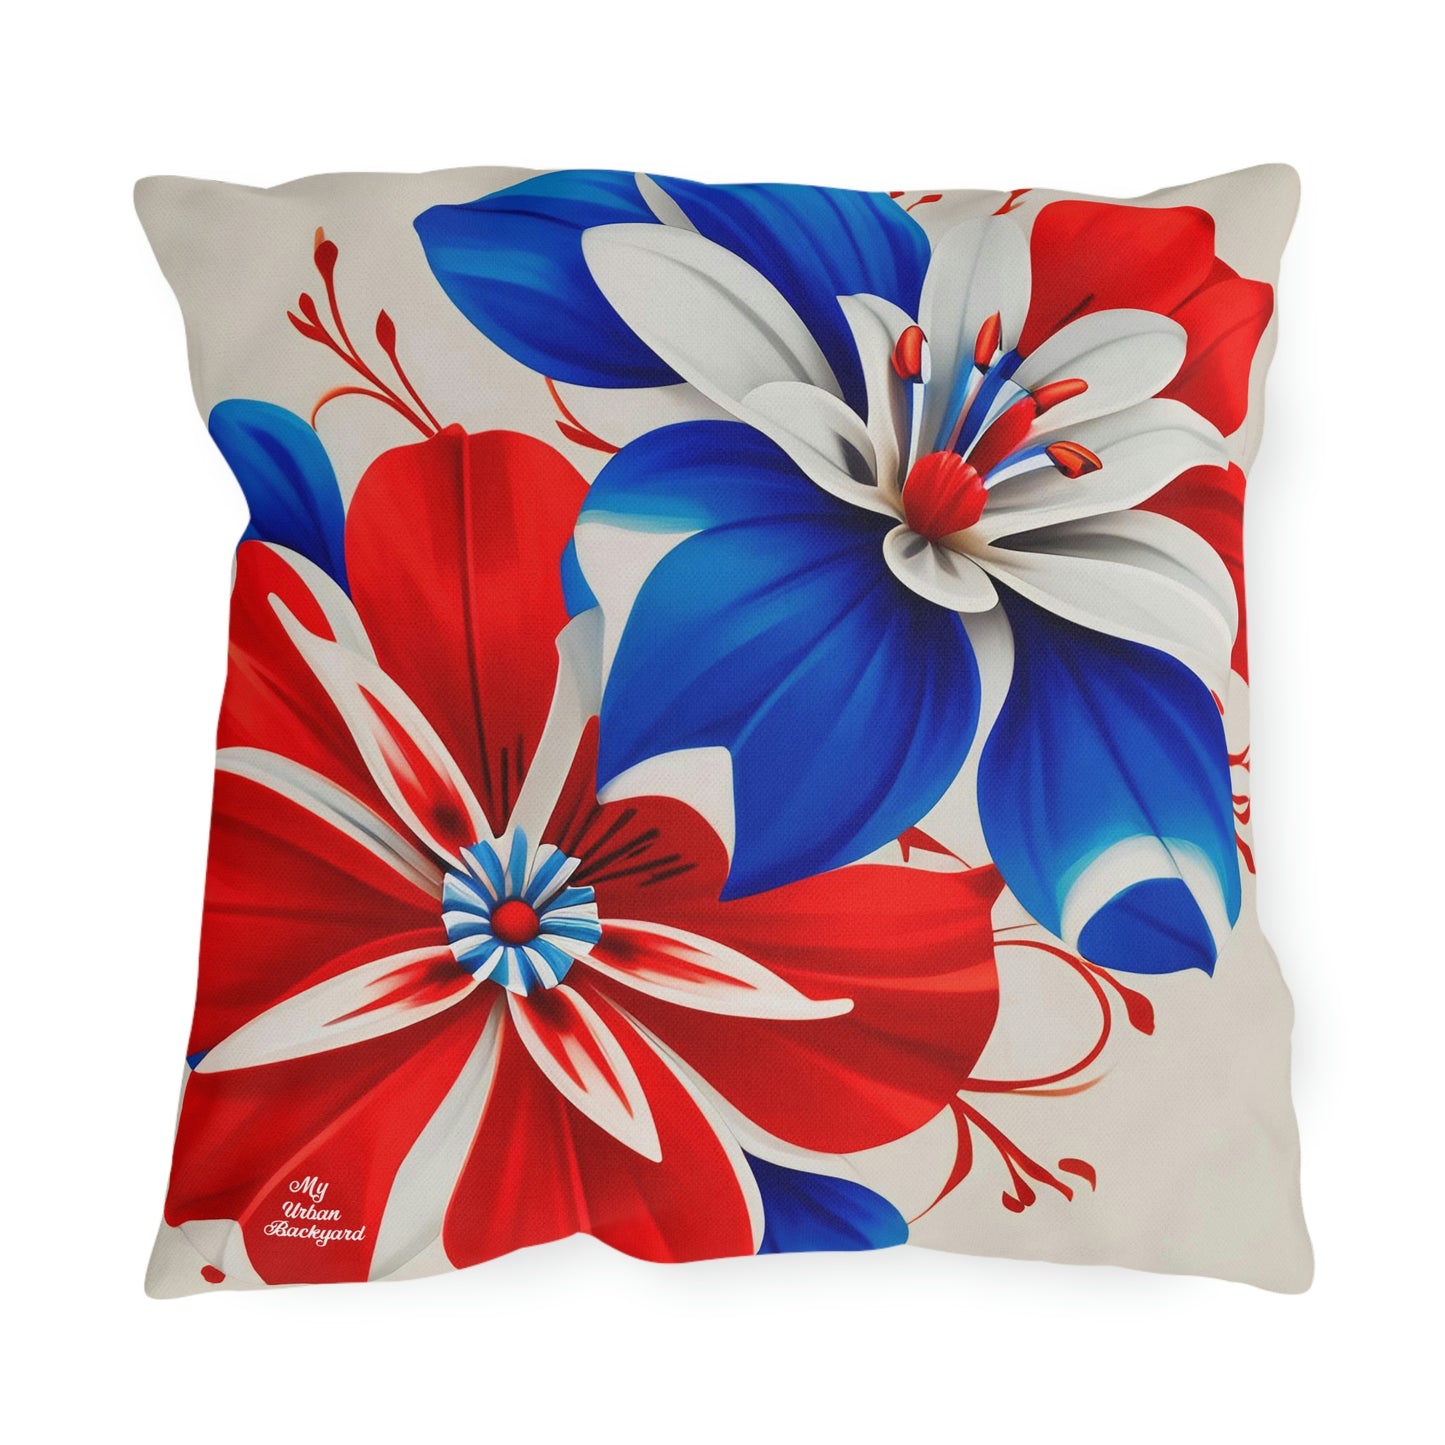 Red White & Blue Flowers, Versatile Throw Pillow - Home or Office Decor